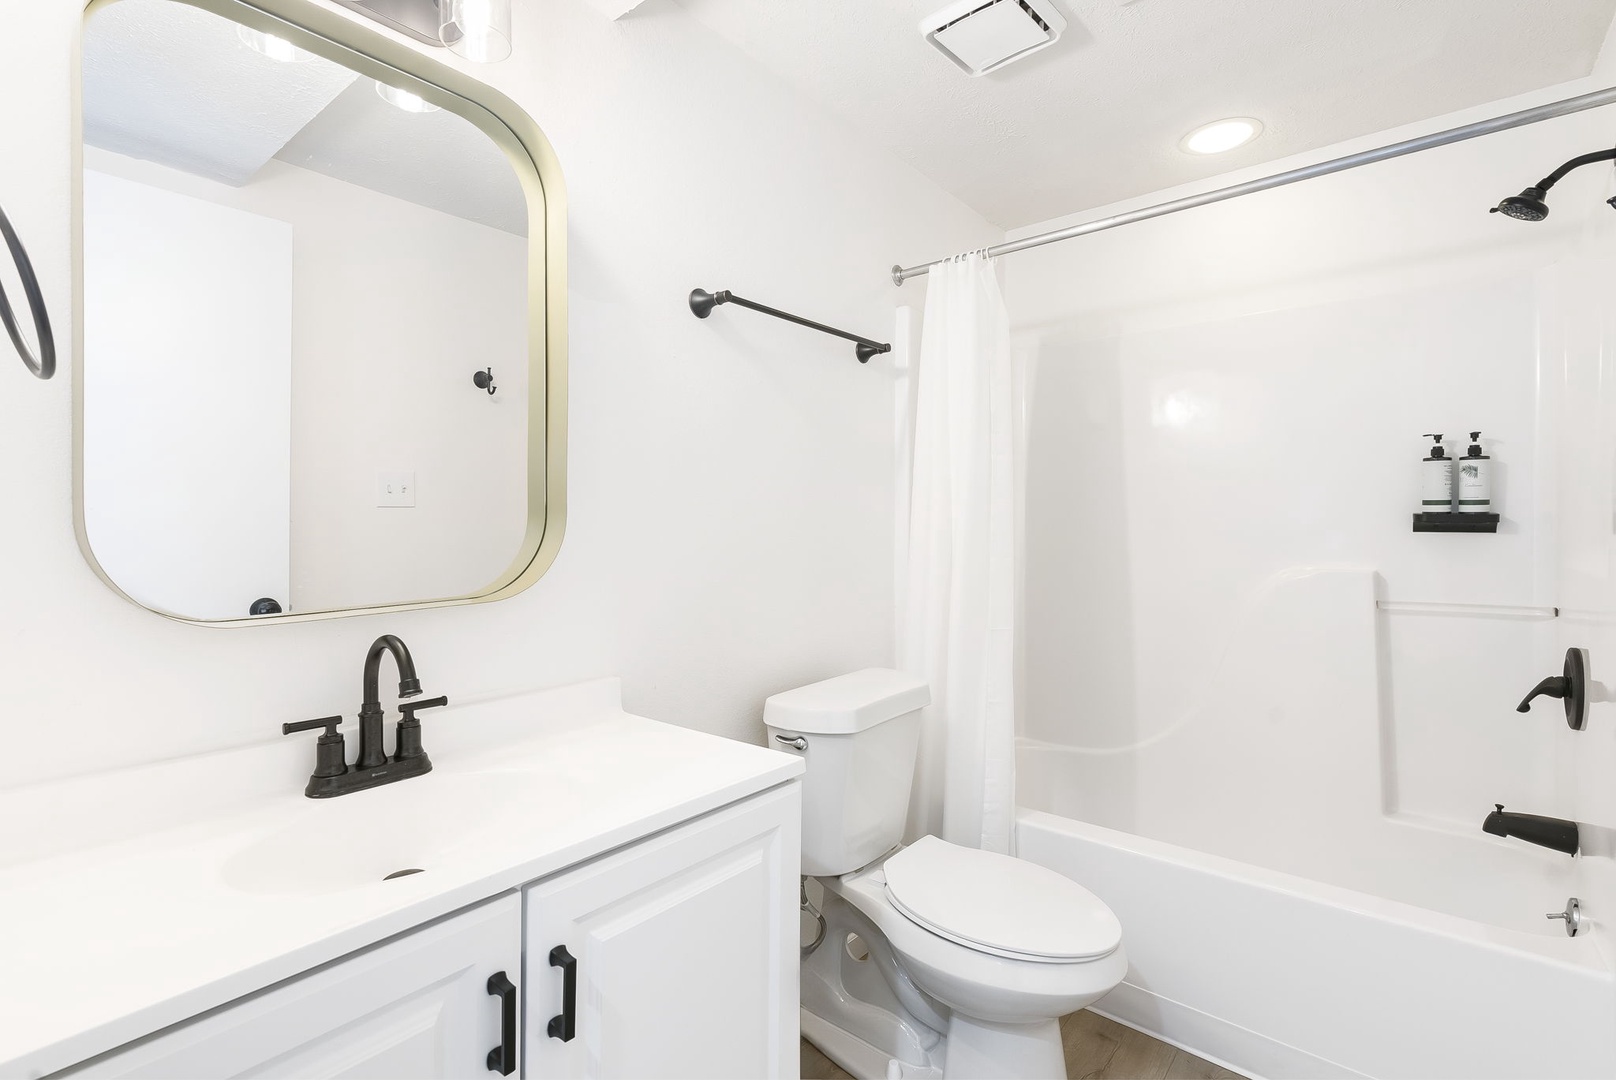 This 1st floor full bath includes a single vanity & shower/tub combo